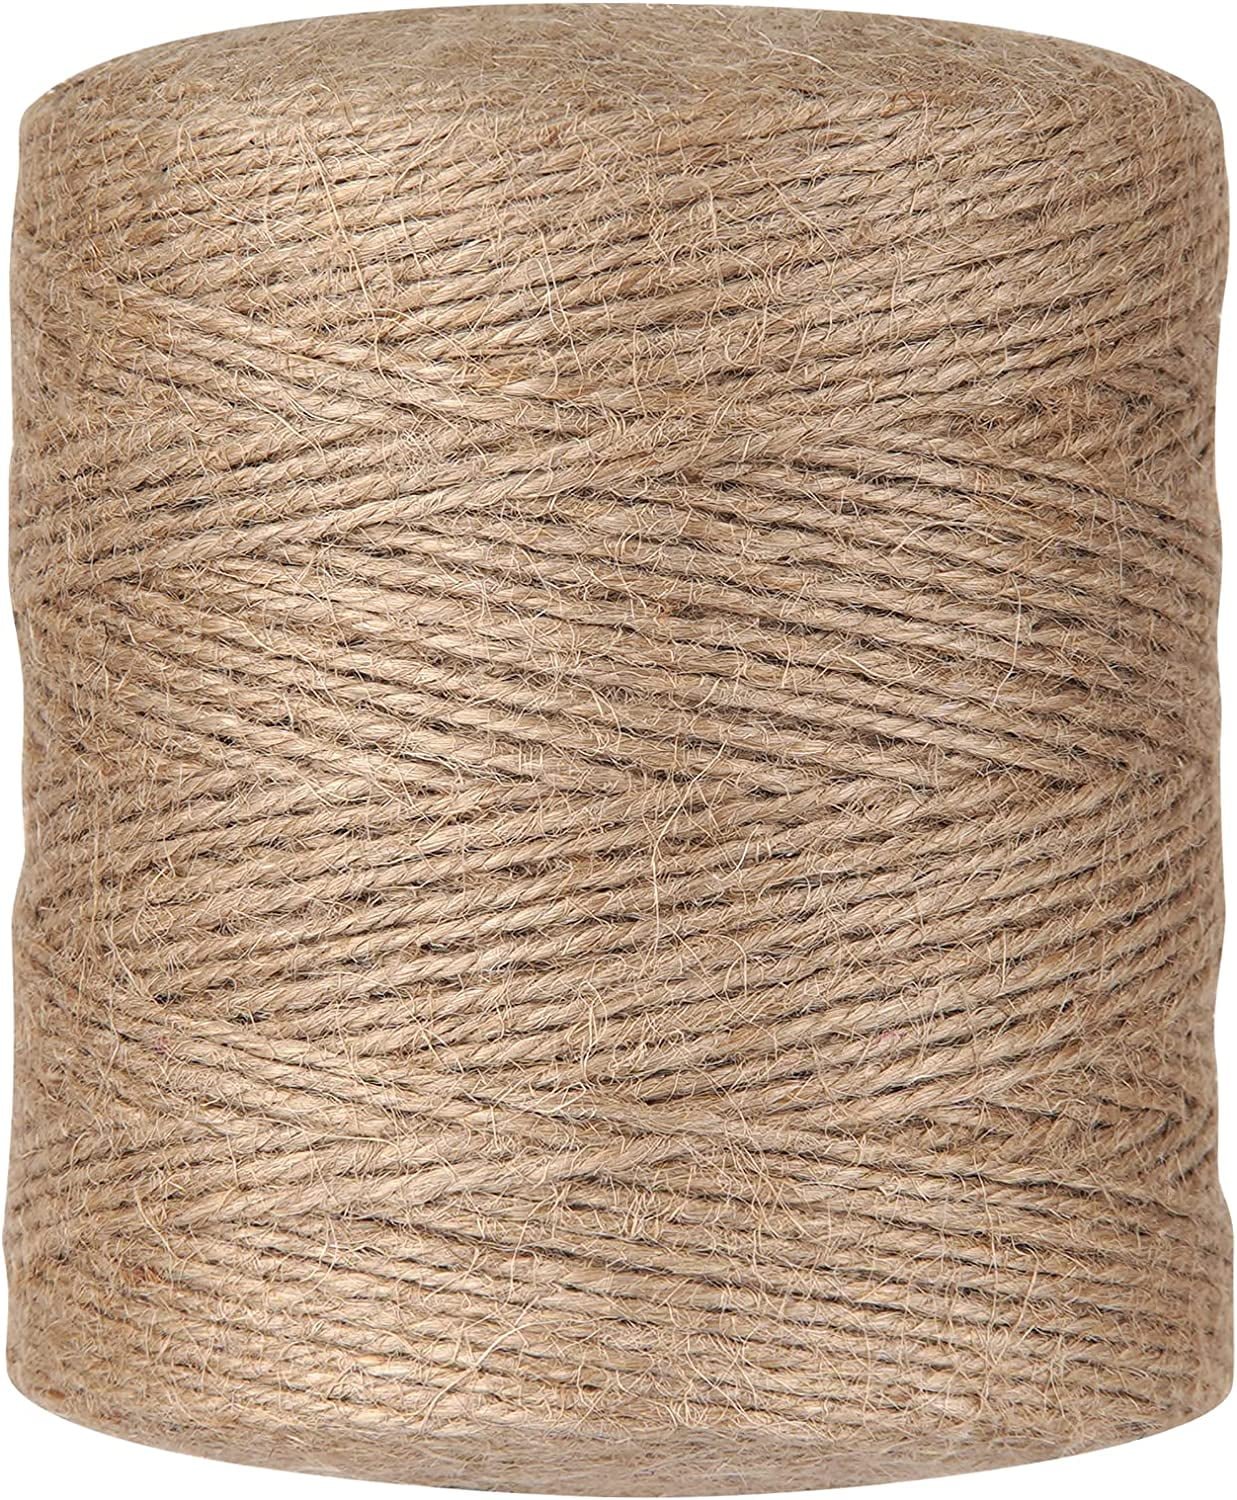  jijAcraft Natural Jute Twine 164 Feet - 4mm Thick Twine String  Garden Twine for Climbing Plants - Strong Brown Hemp Twine String Durable  Rope Ribbon for Crafts Gift Wrapping, Gardening Home